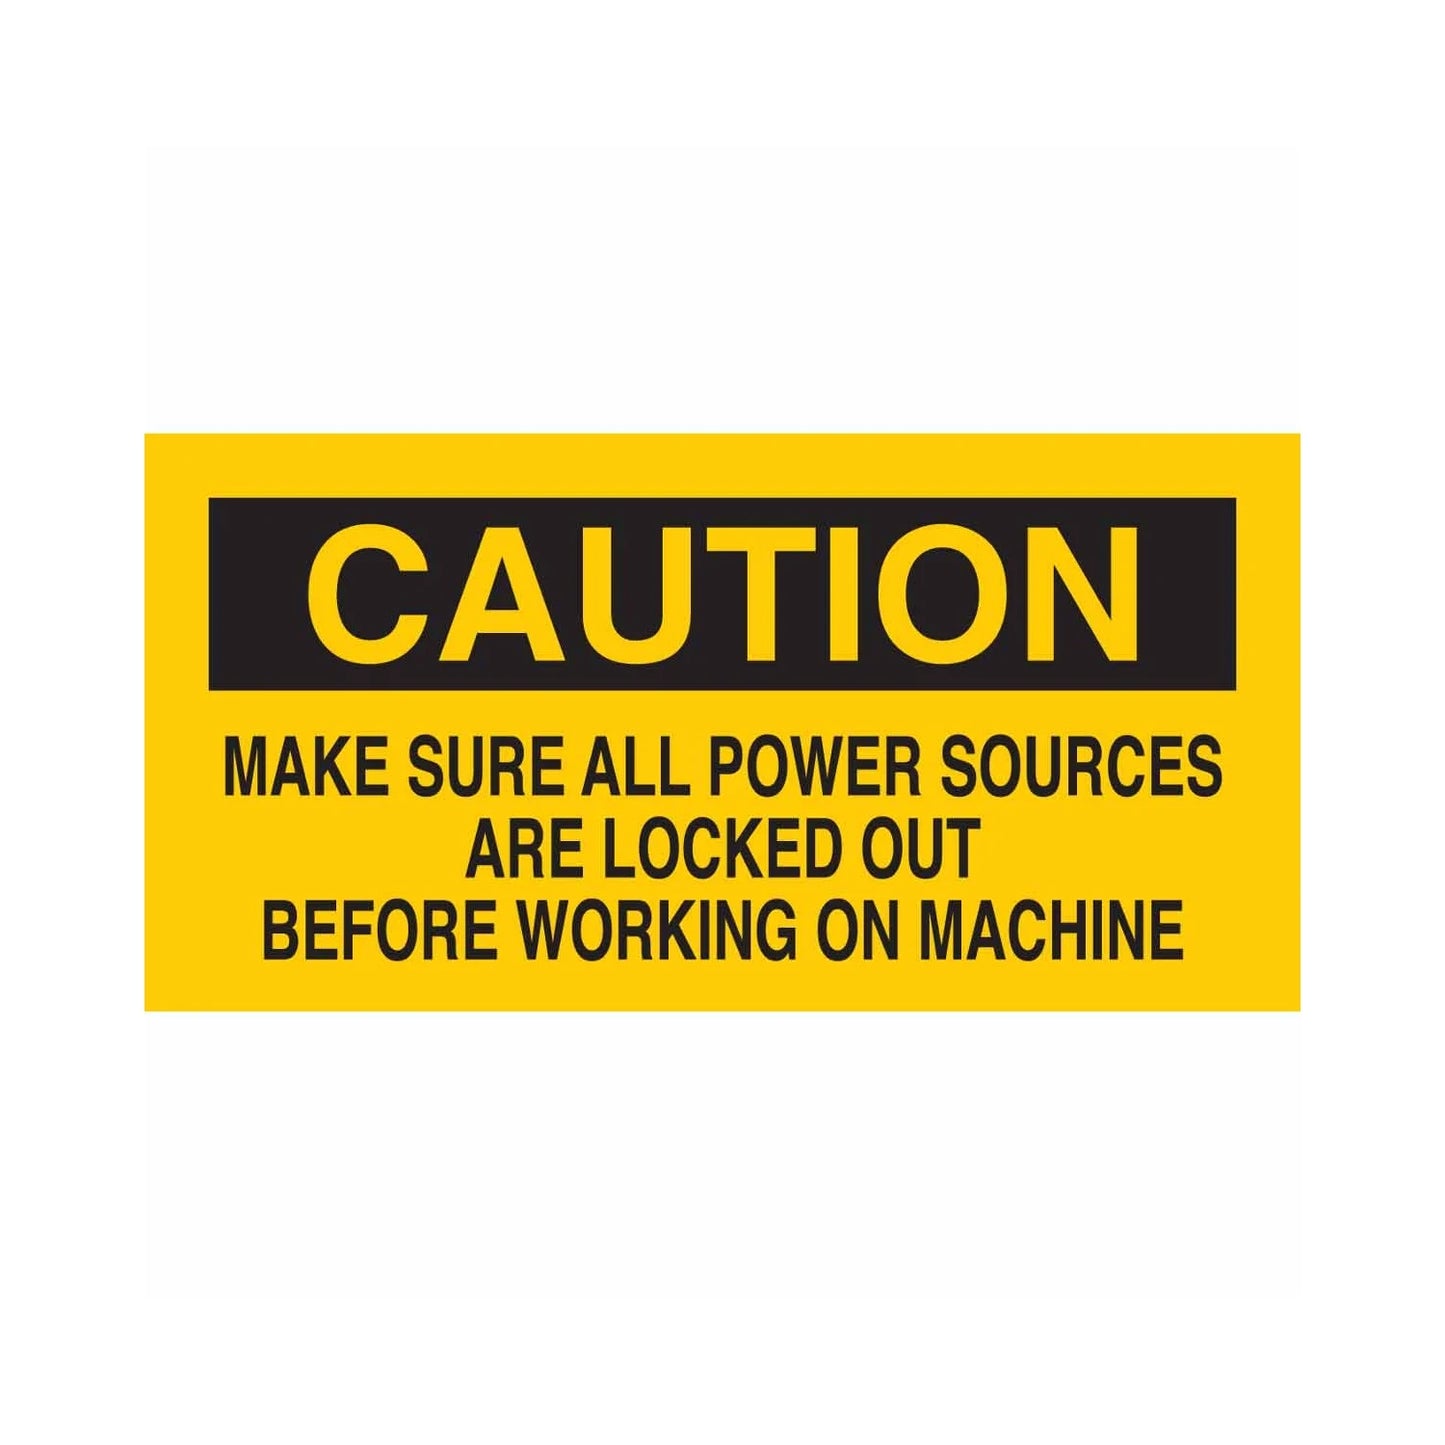 CAUTION Make Sure All Power Sources Are Locked Out Before Working On Machine